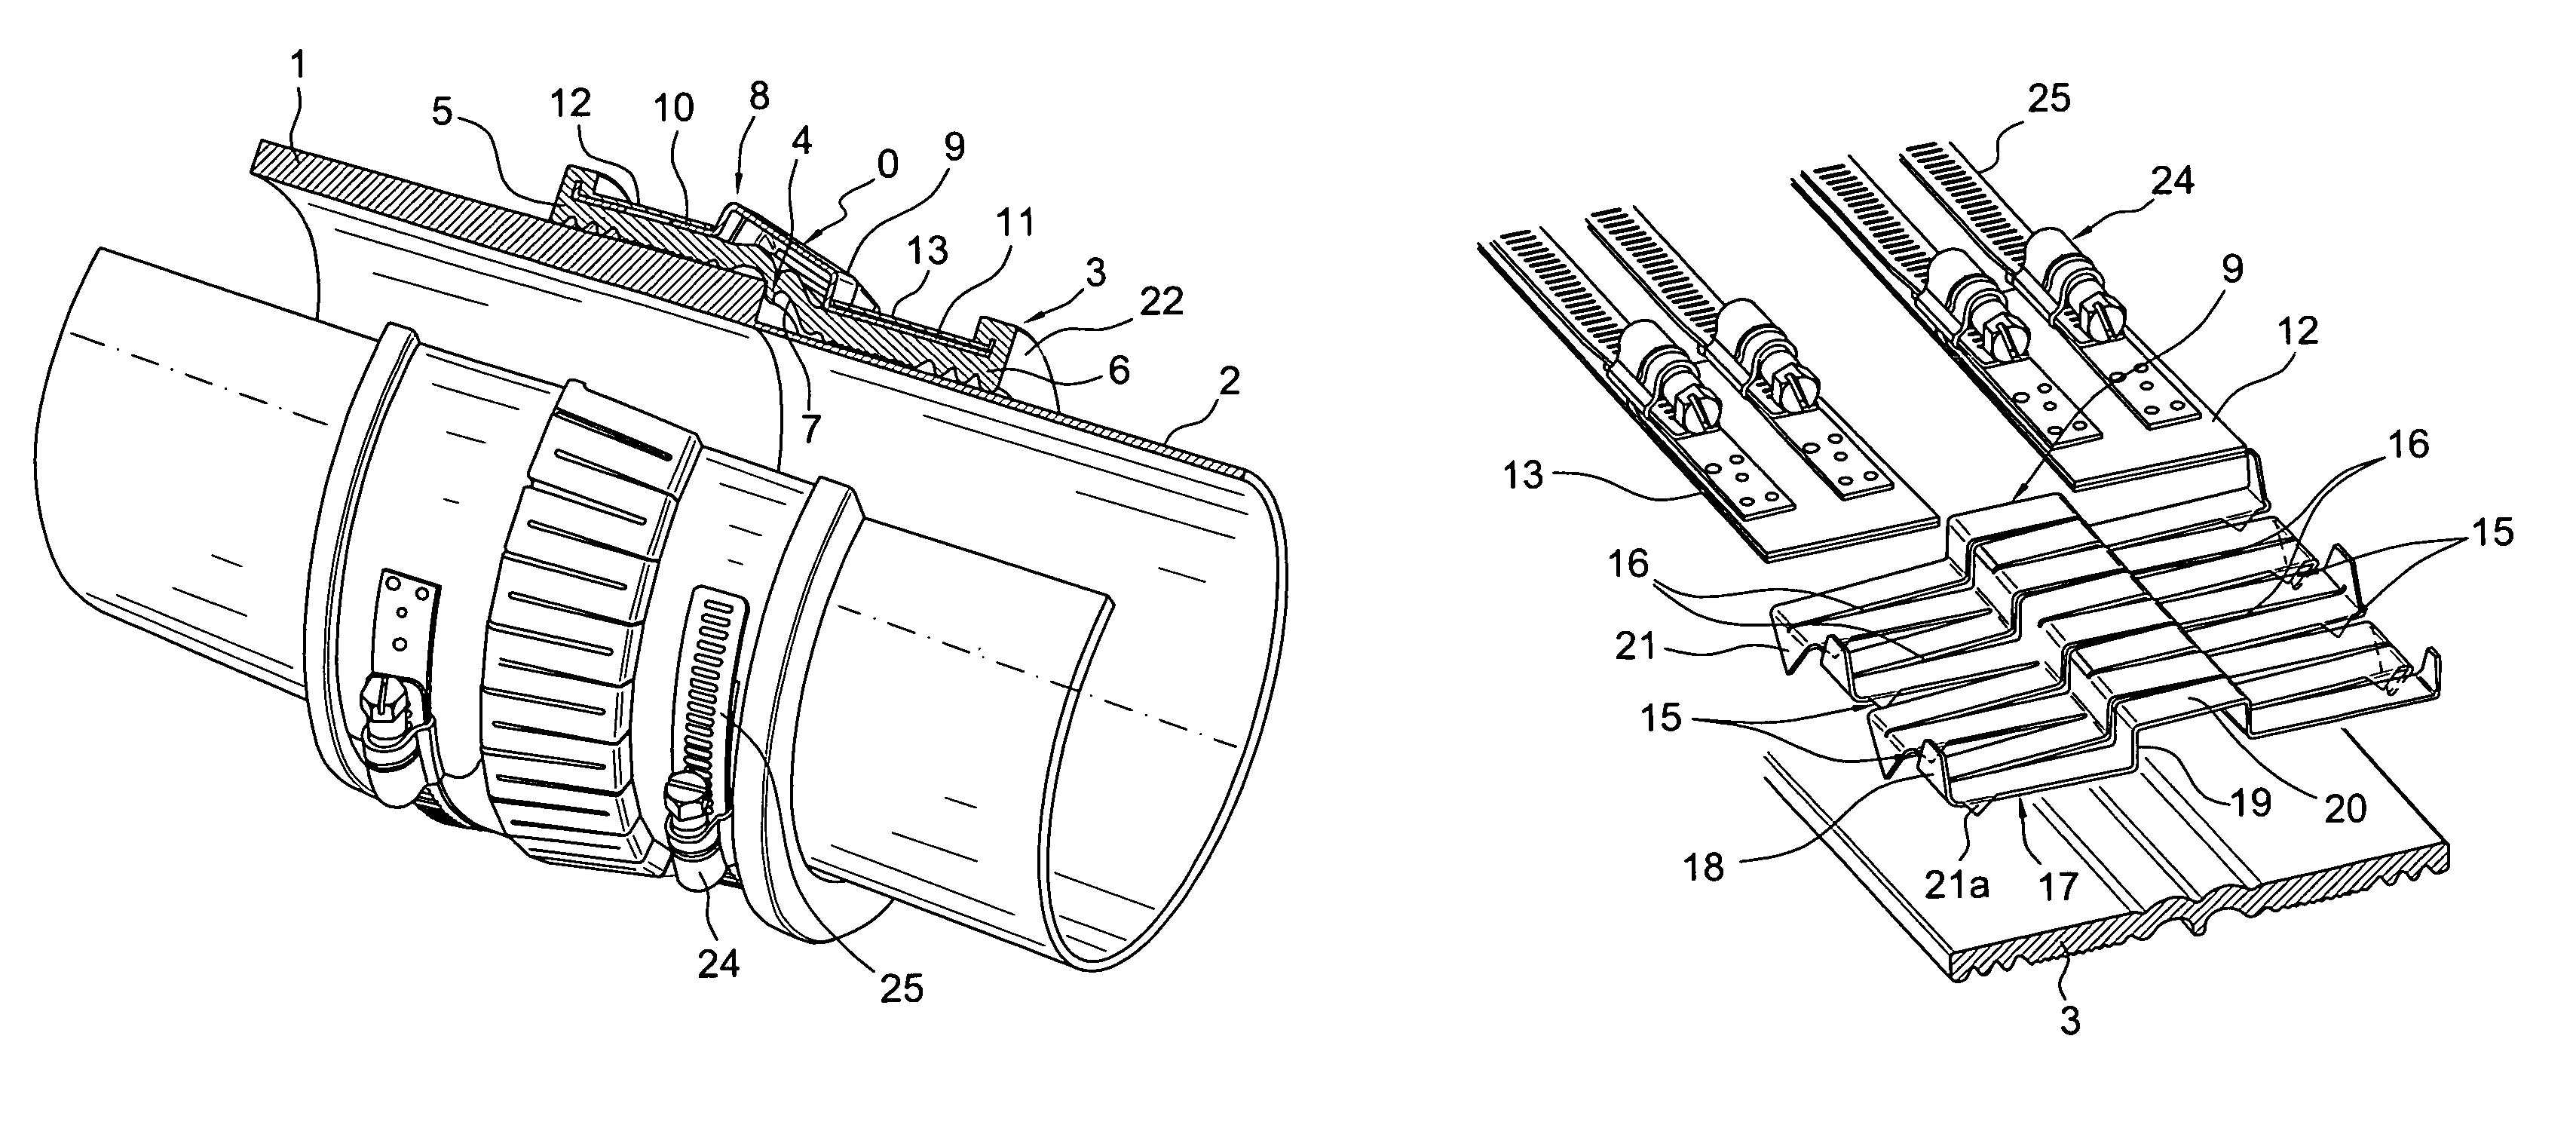 Device for connecting two pipes with different external diameters